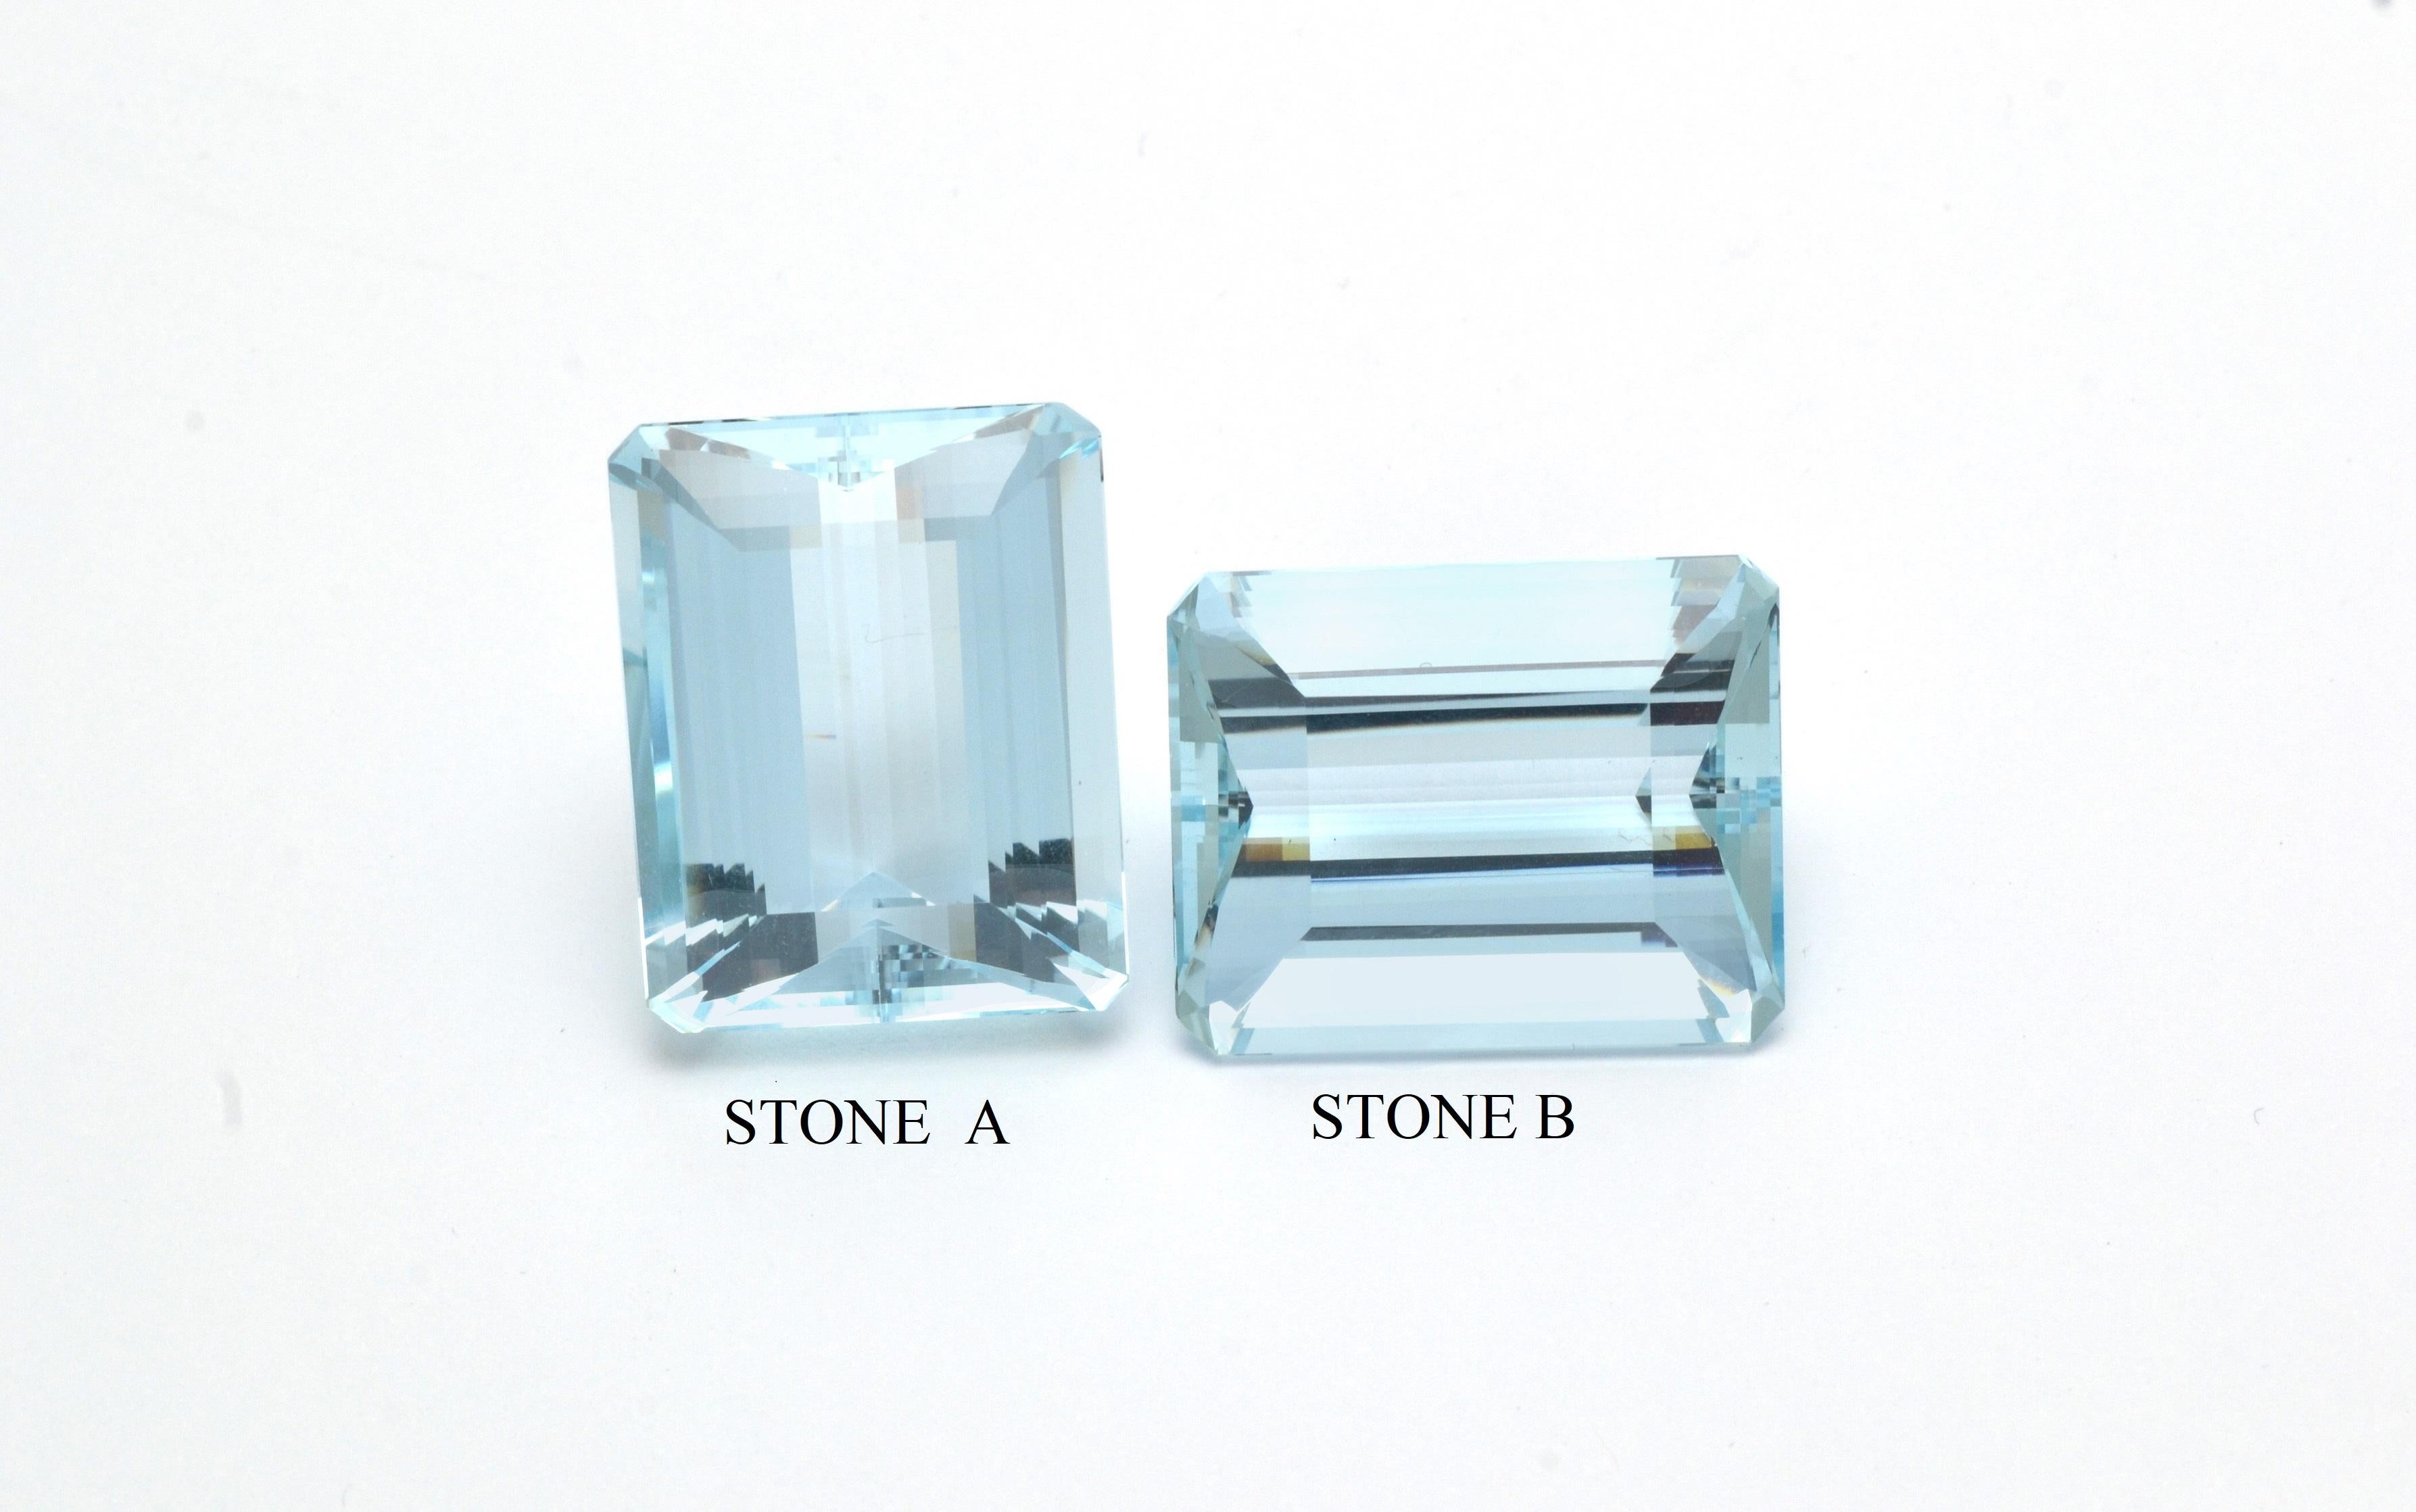 An a pair aquamarine weighing  total carat 99.95, octagonal cut, from Brazil  - Minas Gerais
Our suggestion is to realize a pair of earrings or twin cuffs out of this enchanting matching stones.
Either in gold or titanium. 
Or, simply to have them